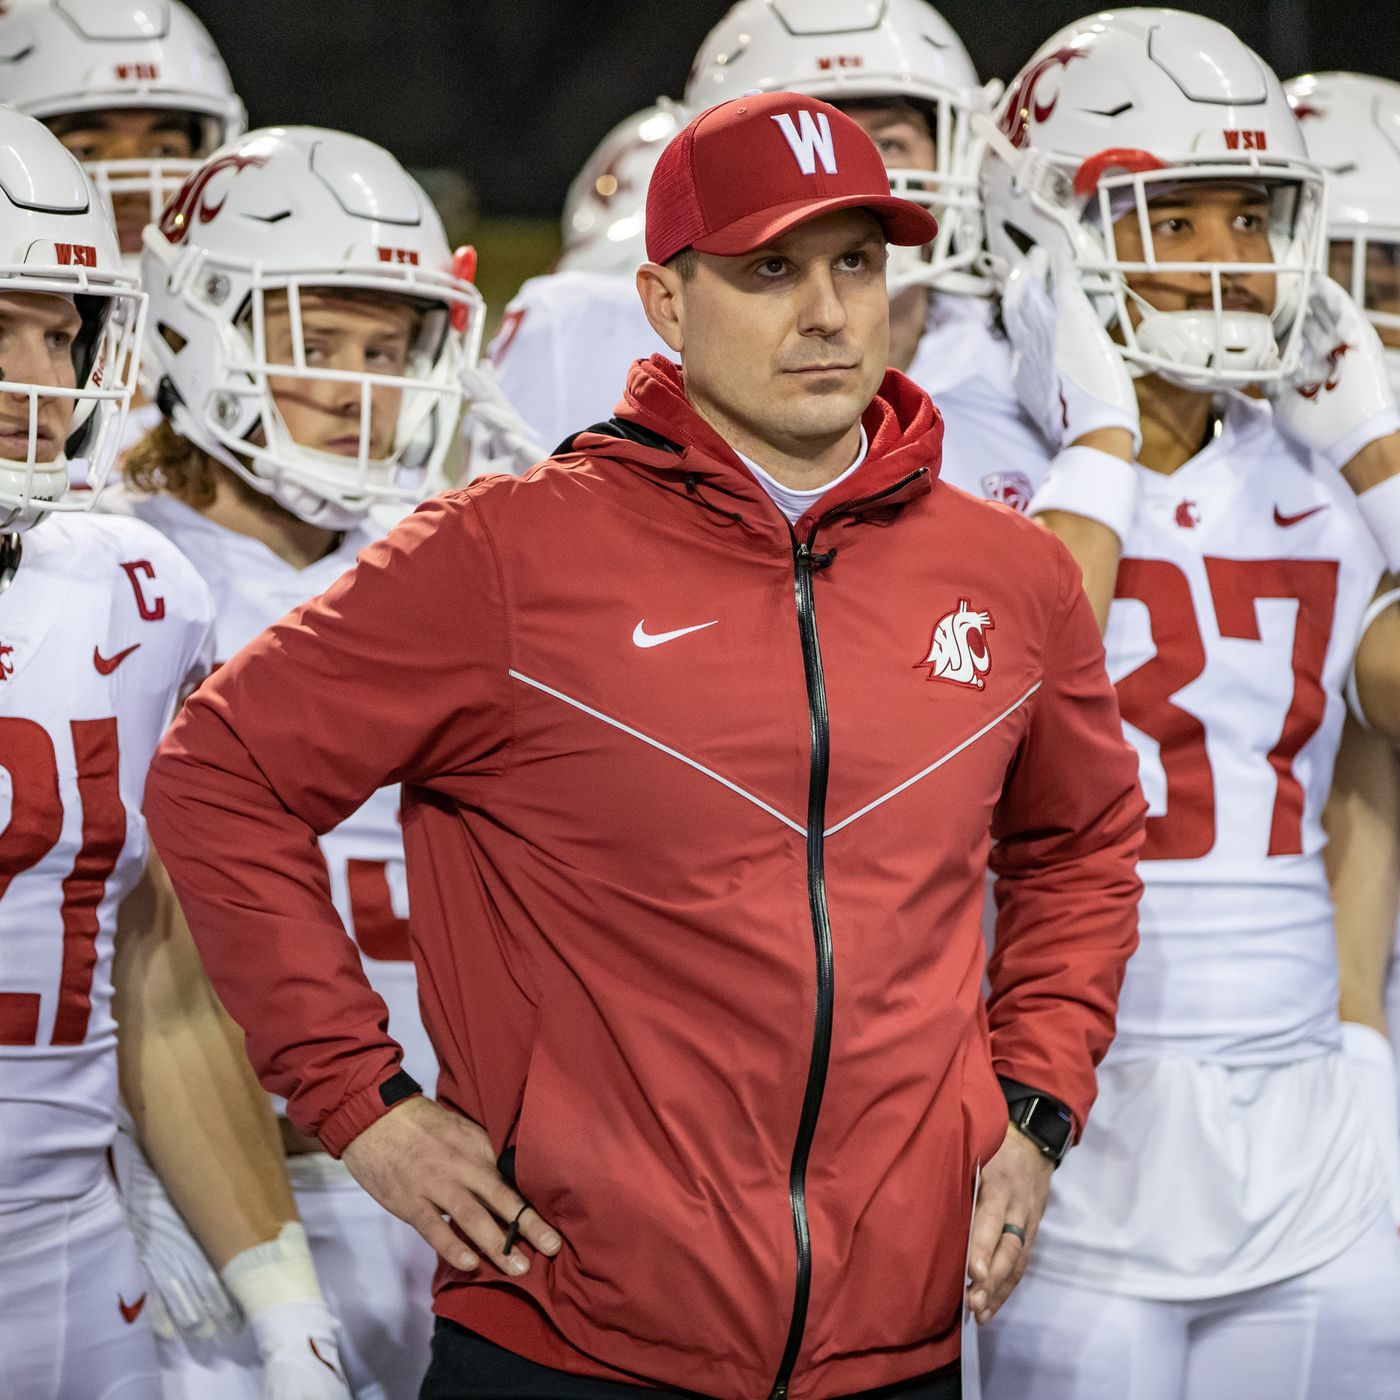 Jake Dickert hired as WSU's next head coach - CougCenter